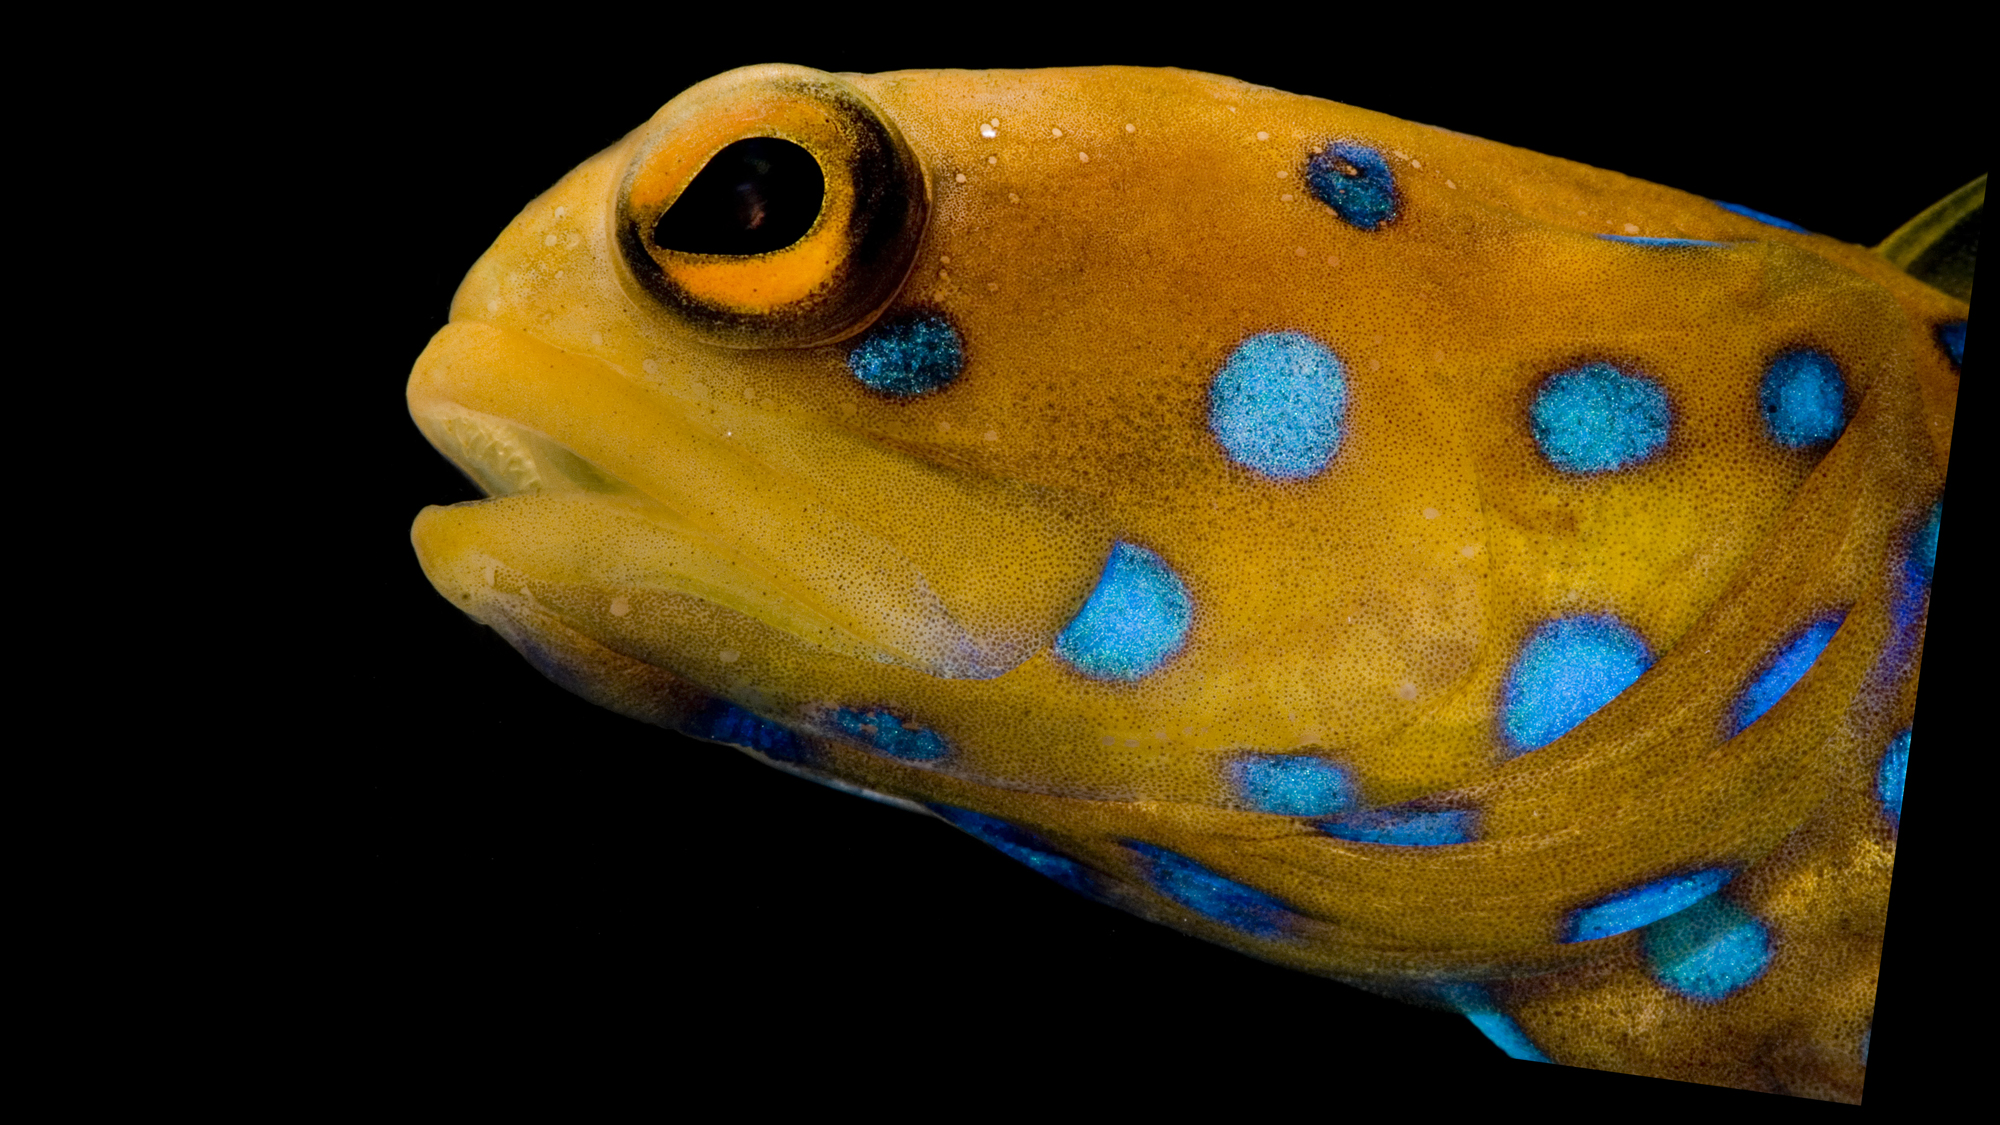 Blue-spotted jawfishes live in burrows, “which they block themselves inside each evening. In the morning they remove the debris so they can pass through the burrow opening again.” Photo © Danté Fenolio